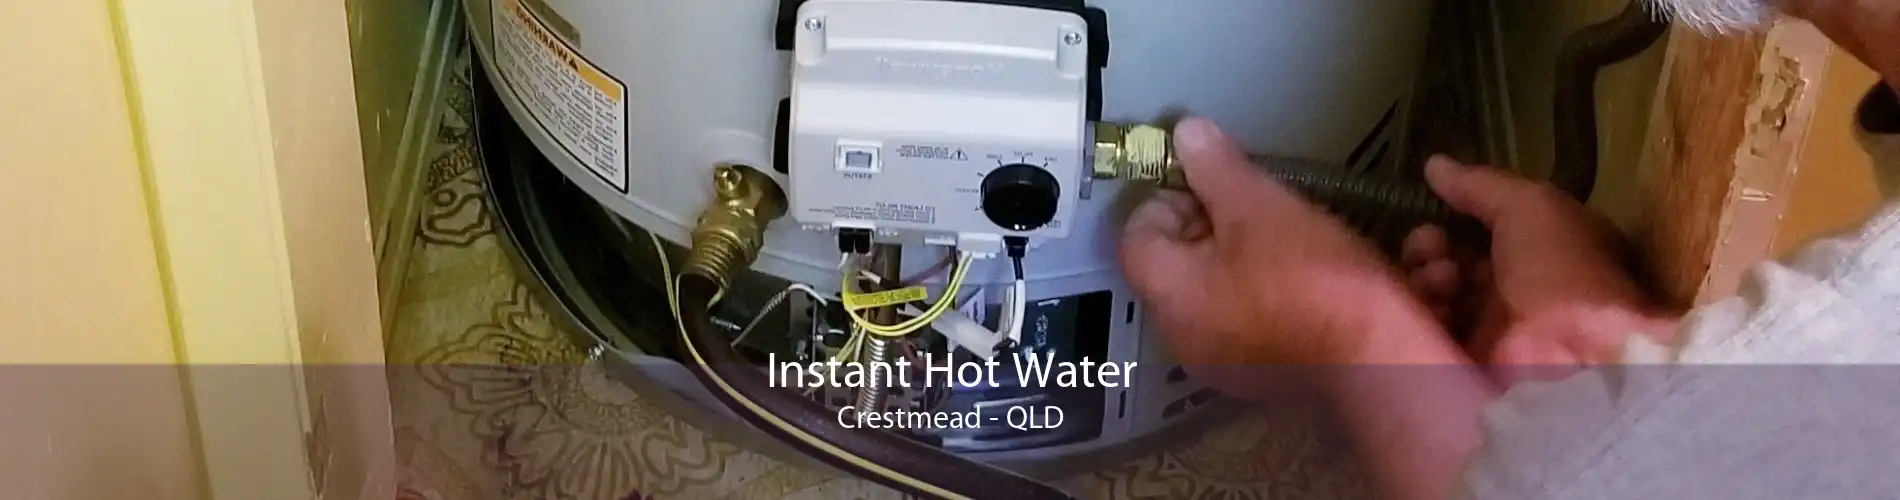 Instant Hot Water Crestmead - QLD